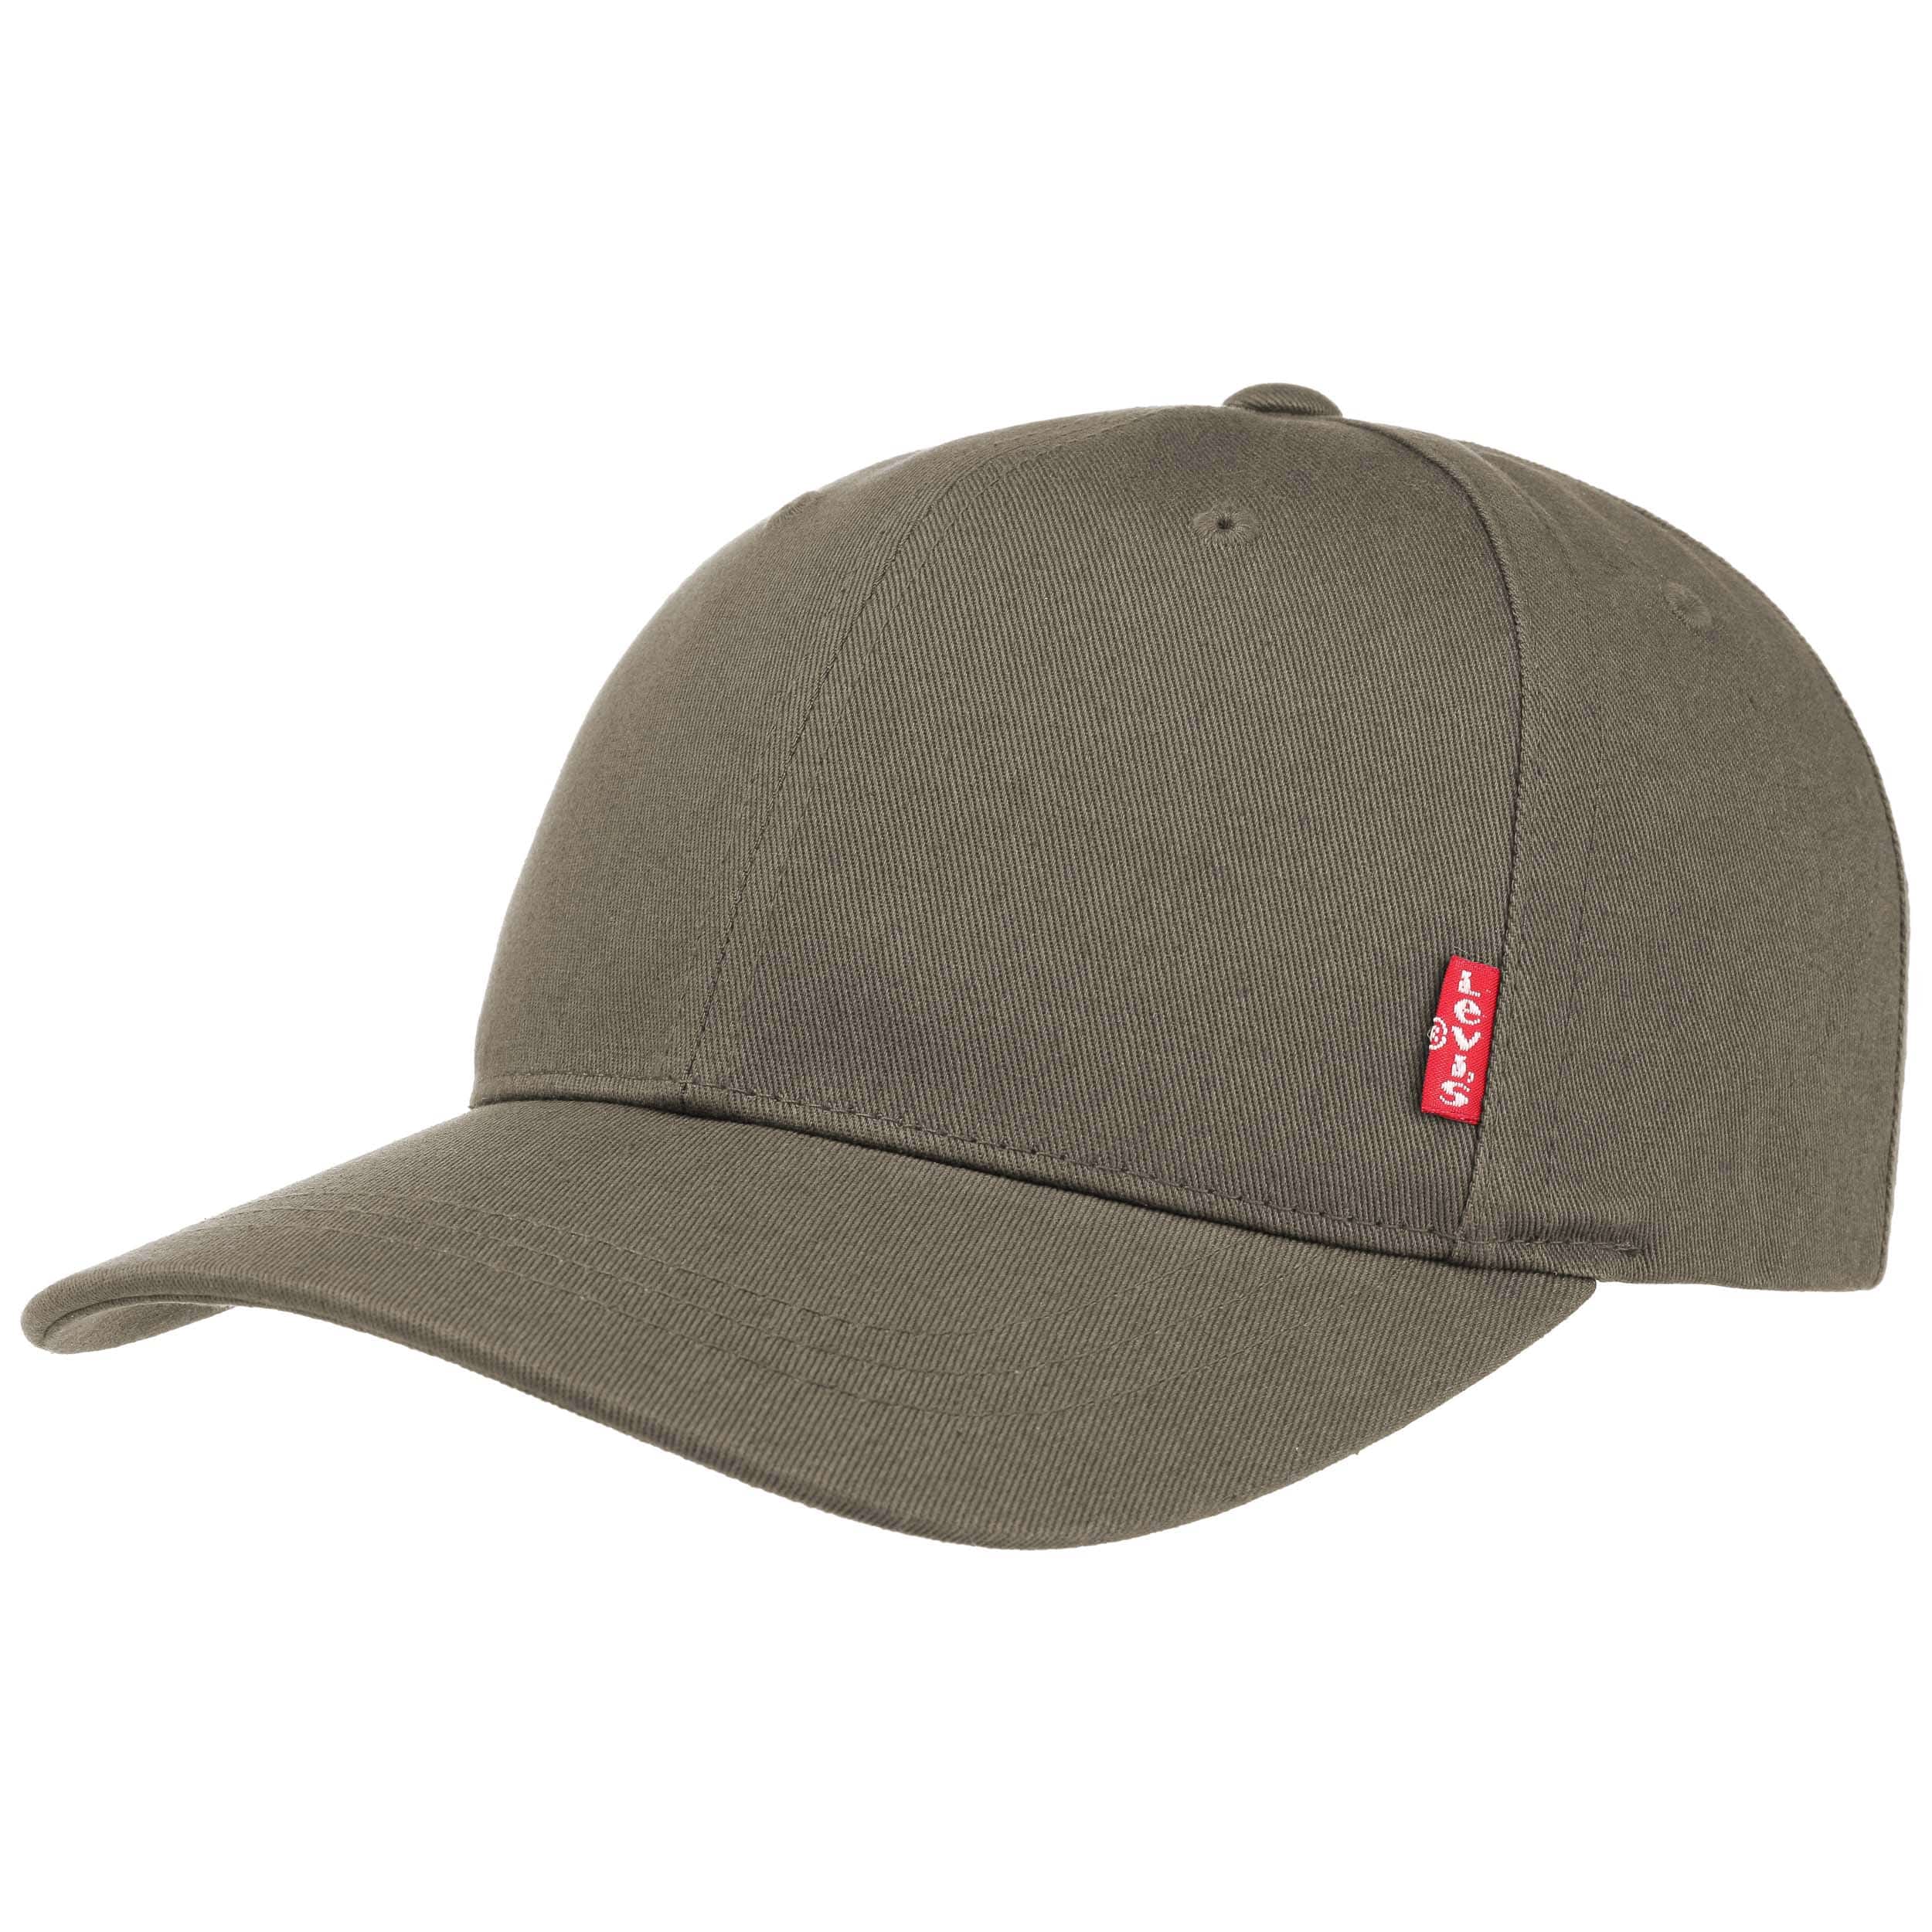 Classic Twill Red Tab Cap by Levi´s - 26,95 €